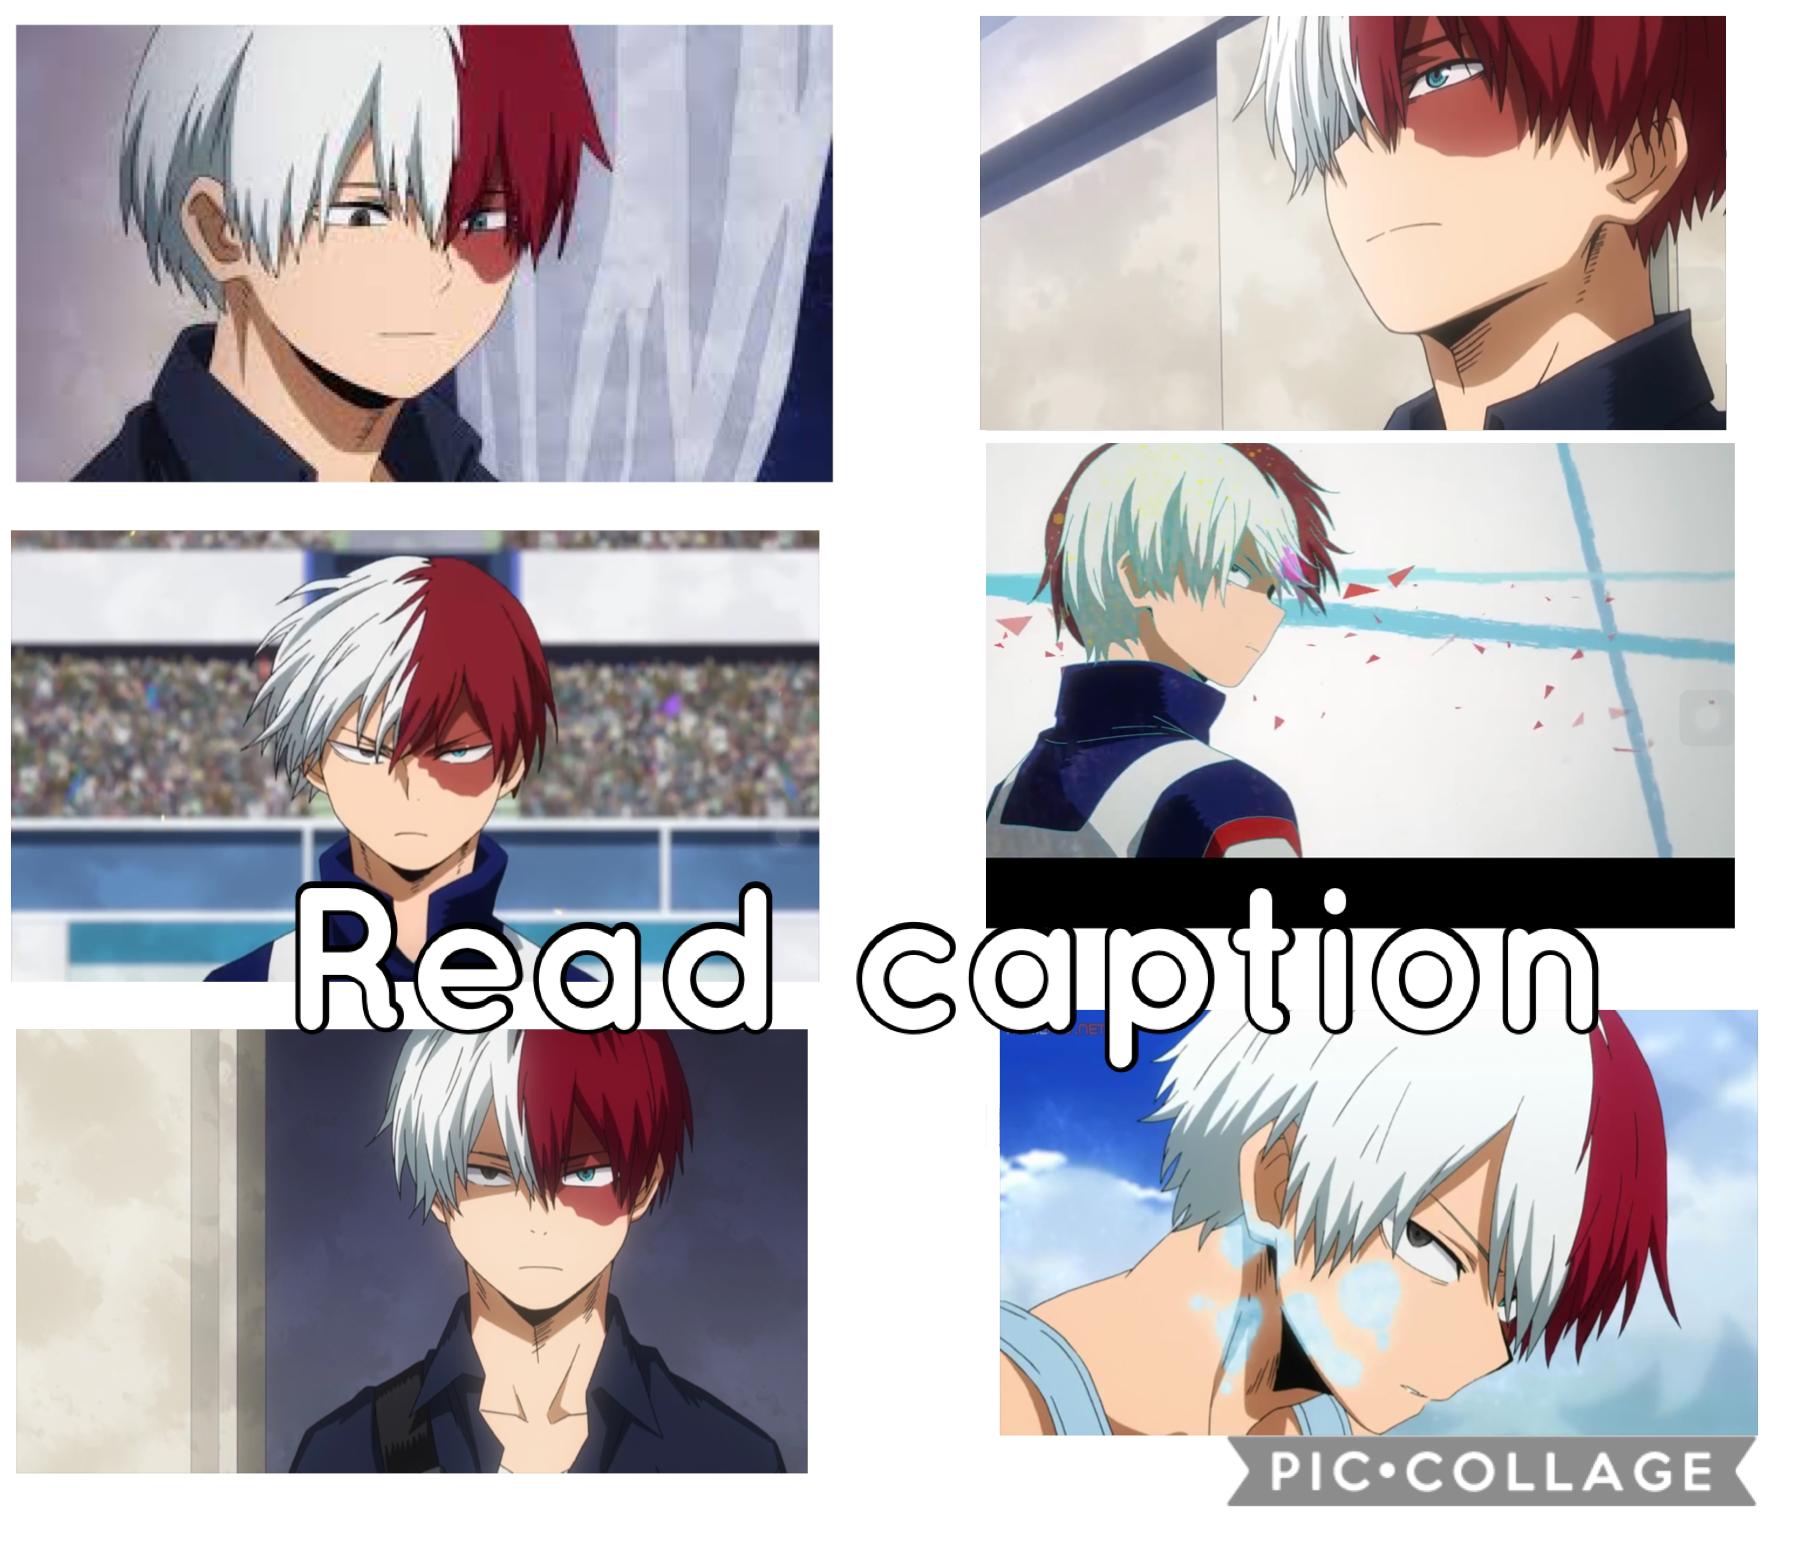 Tap
I'm gonna be drawing Todoroki alot in my free time
Pls number which ones I shud draw in remixes
Thx! ^^